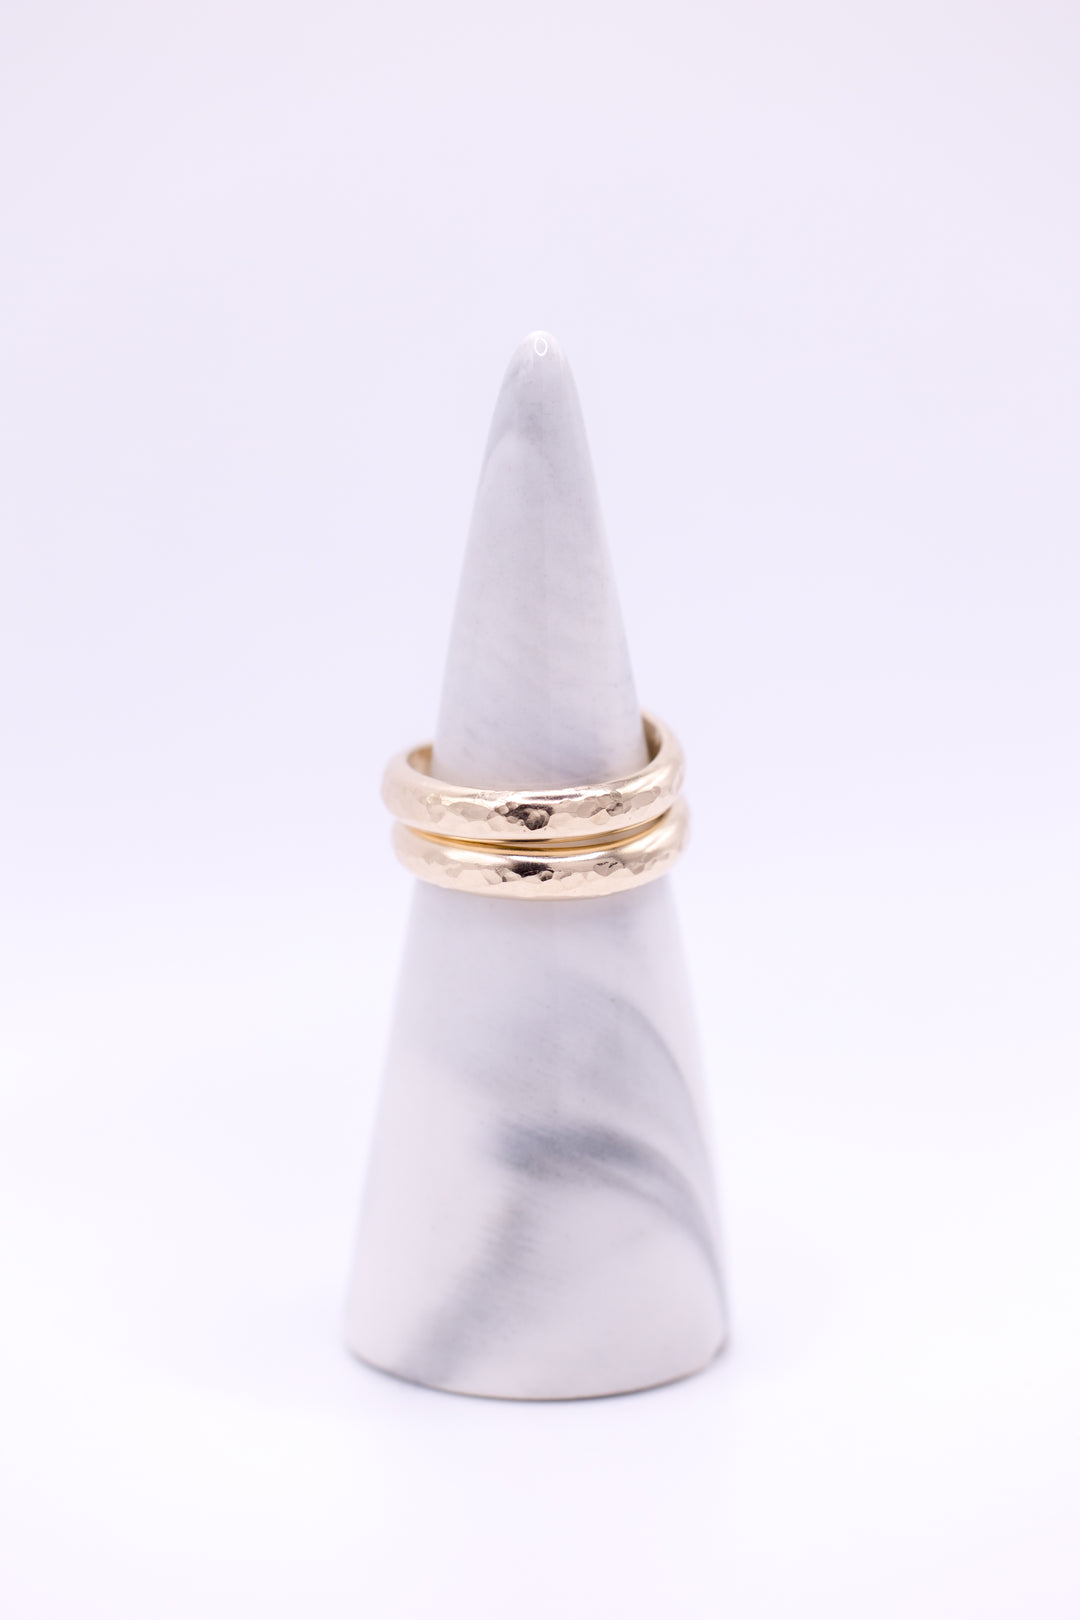 Gold Hammered Handmade Ring by Anna Shae Jewelry in Lexington, Kentucky